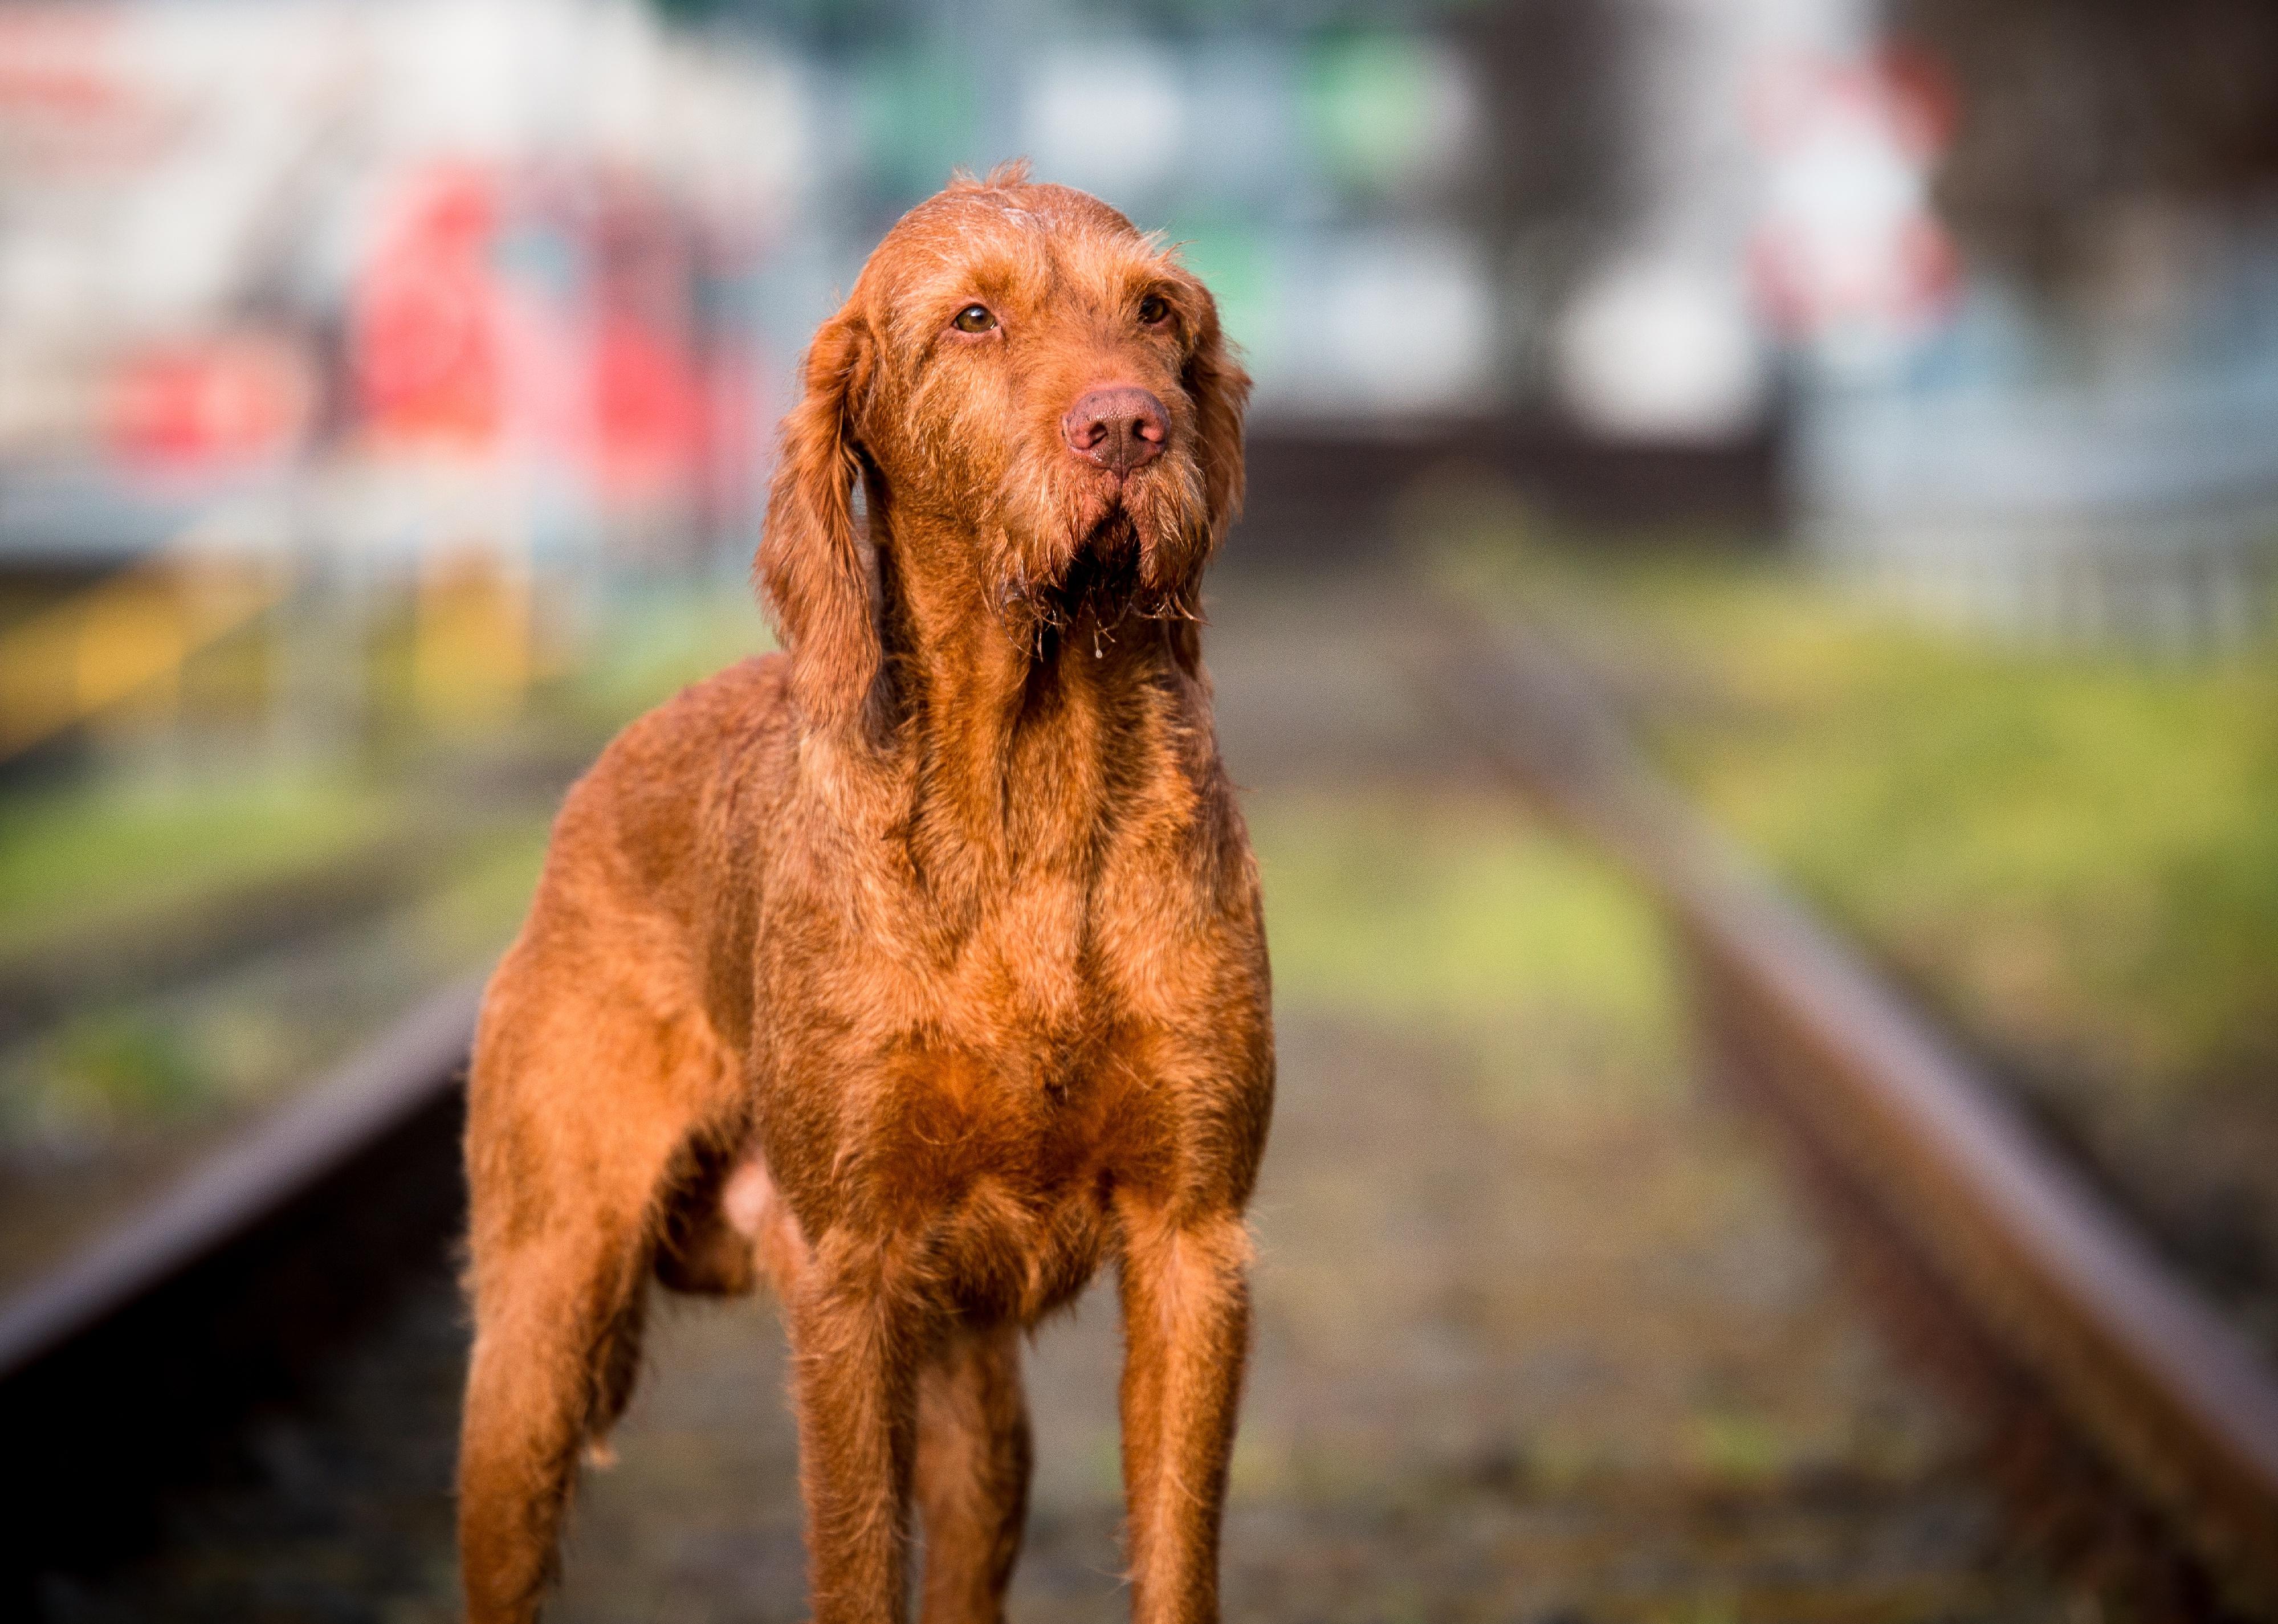 A Wirehaired Vizsla in a city with blurred background.